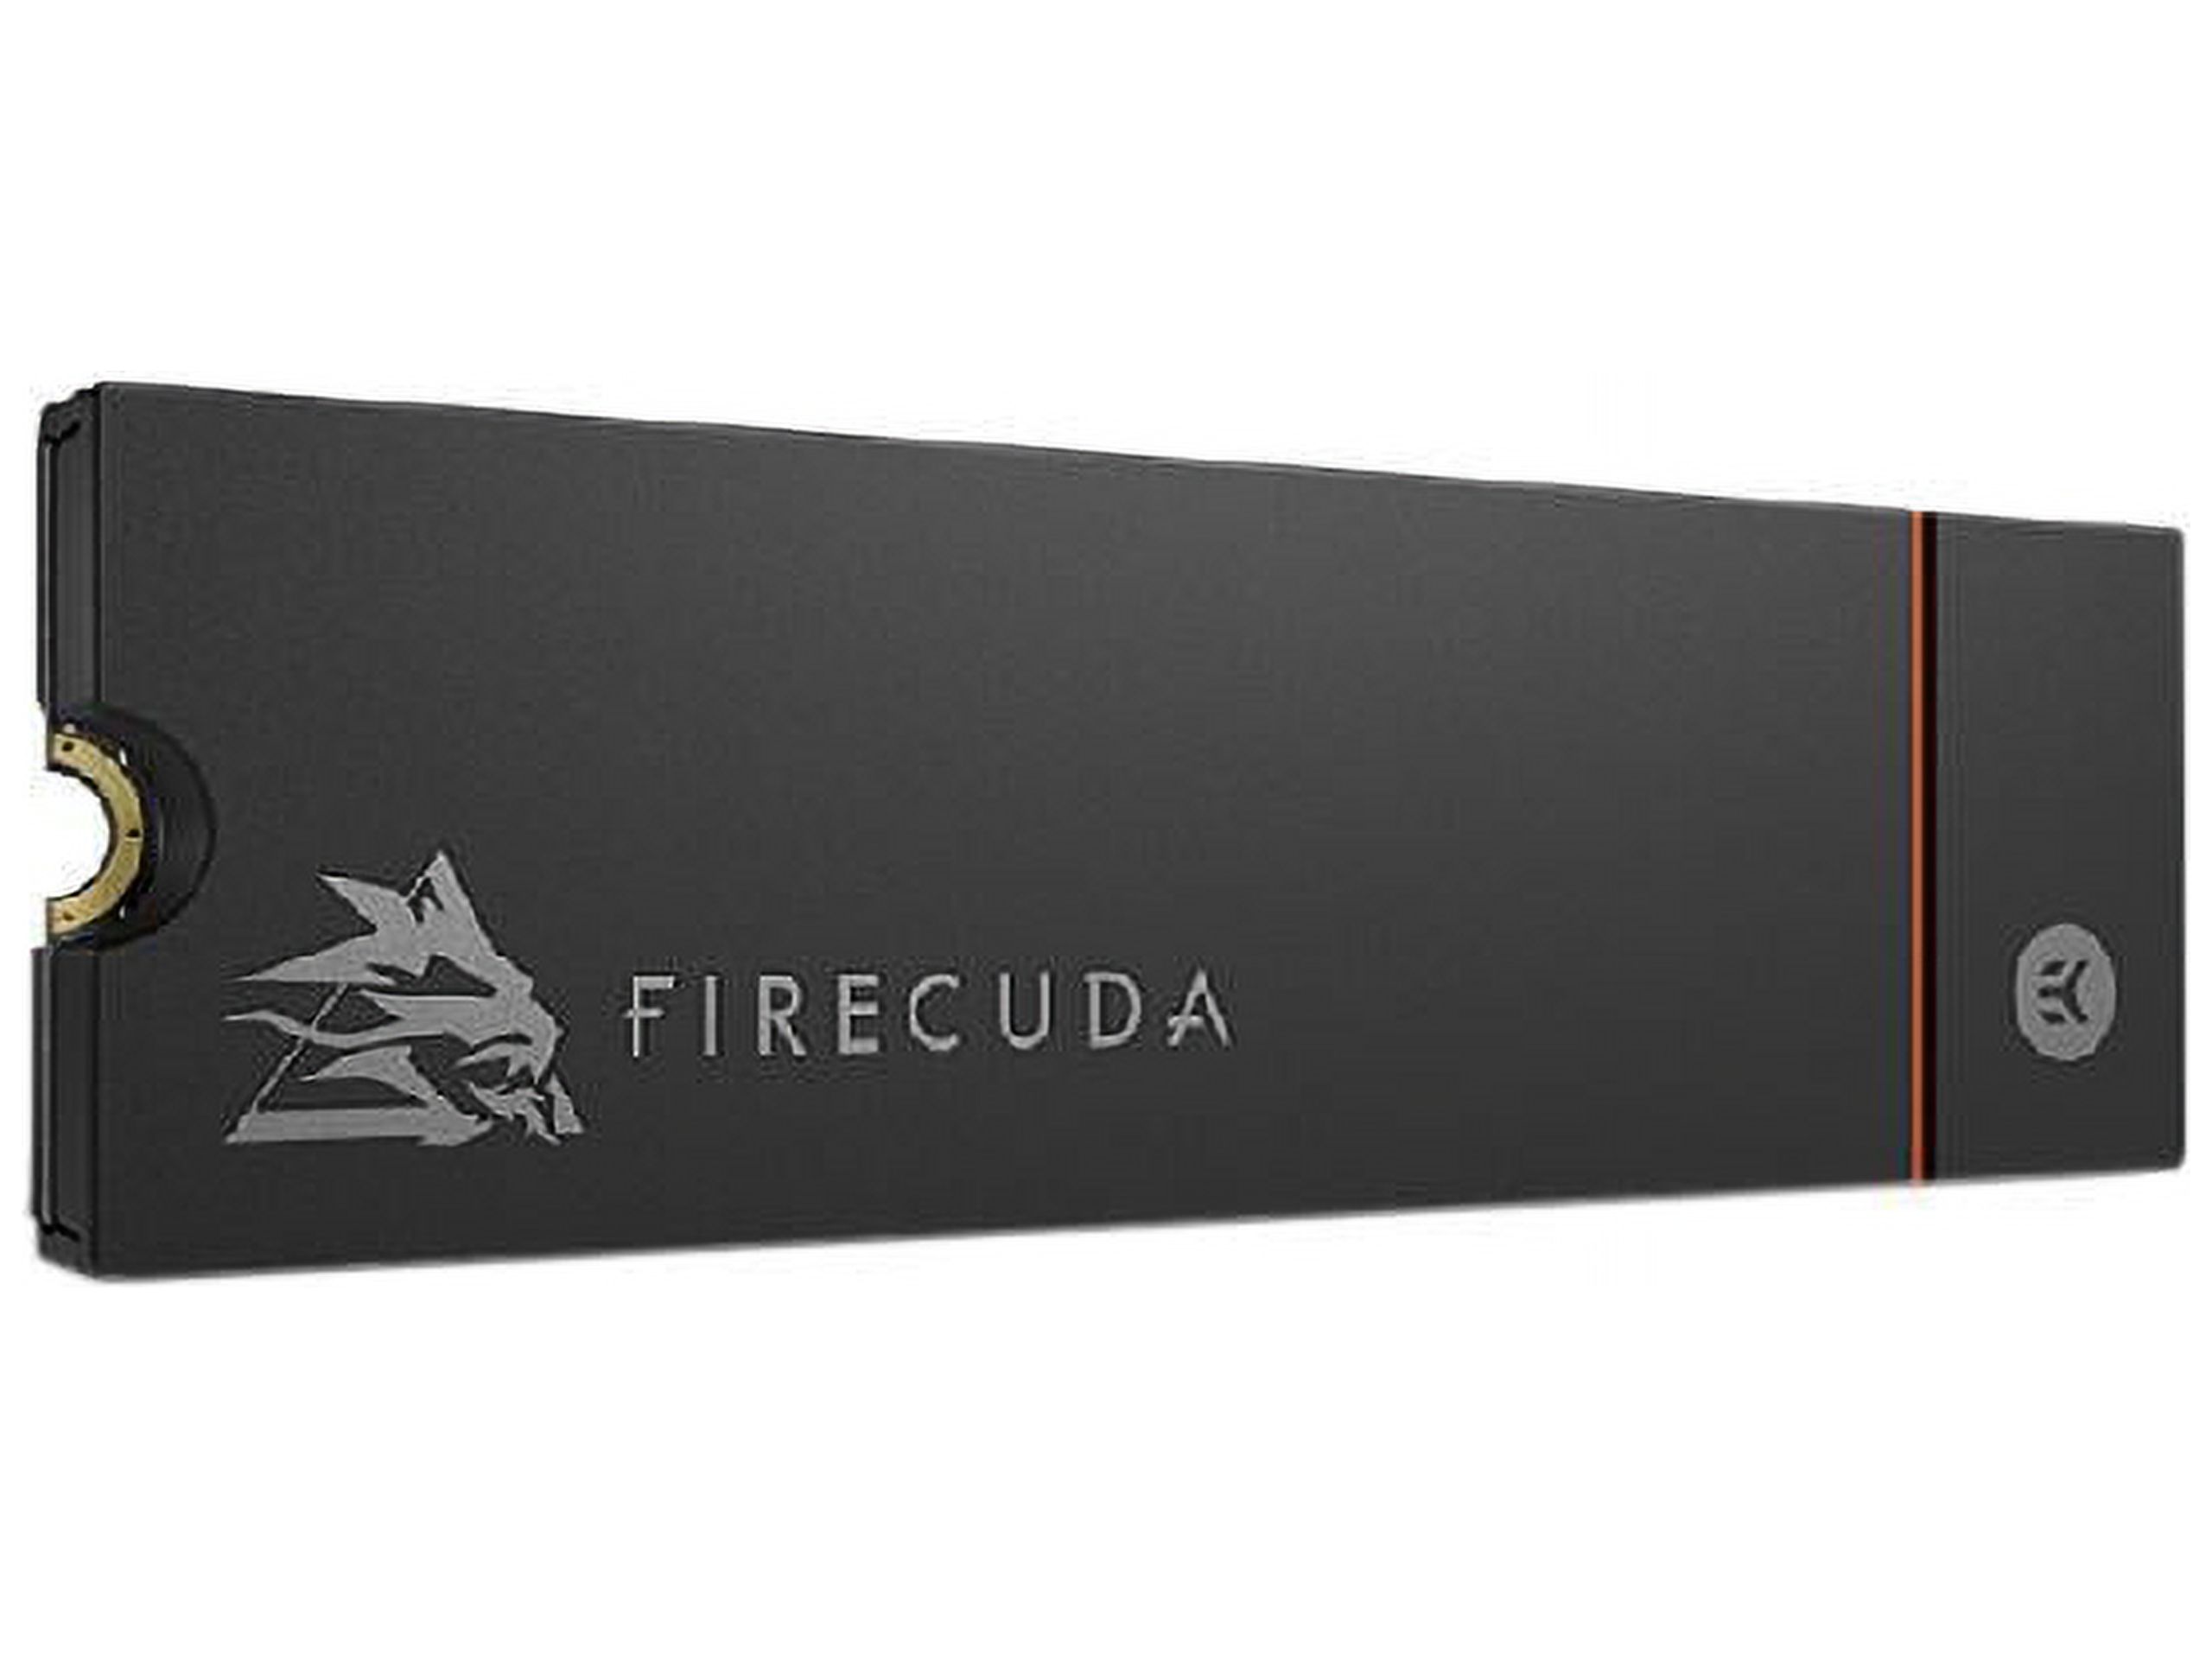 Seagate FireCuda 530 M.2 2280 4TB PCIe Gen4 x4 NVMe 1.4 3D NAND Internal Solid State Drive (SSD) ZP4000GM3A023 - image 2 of 6